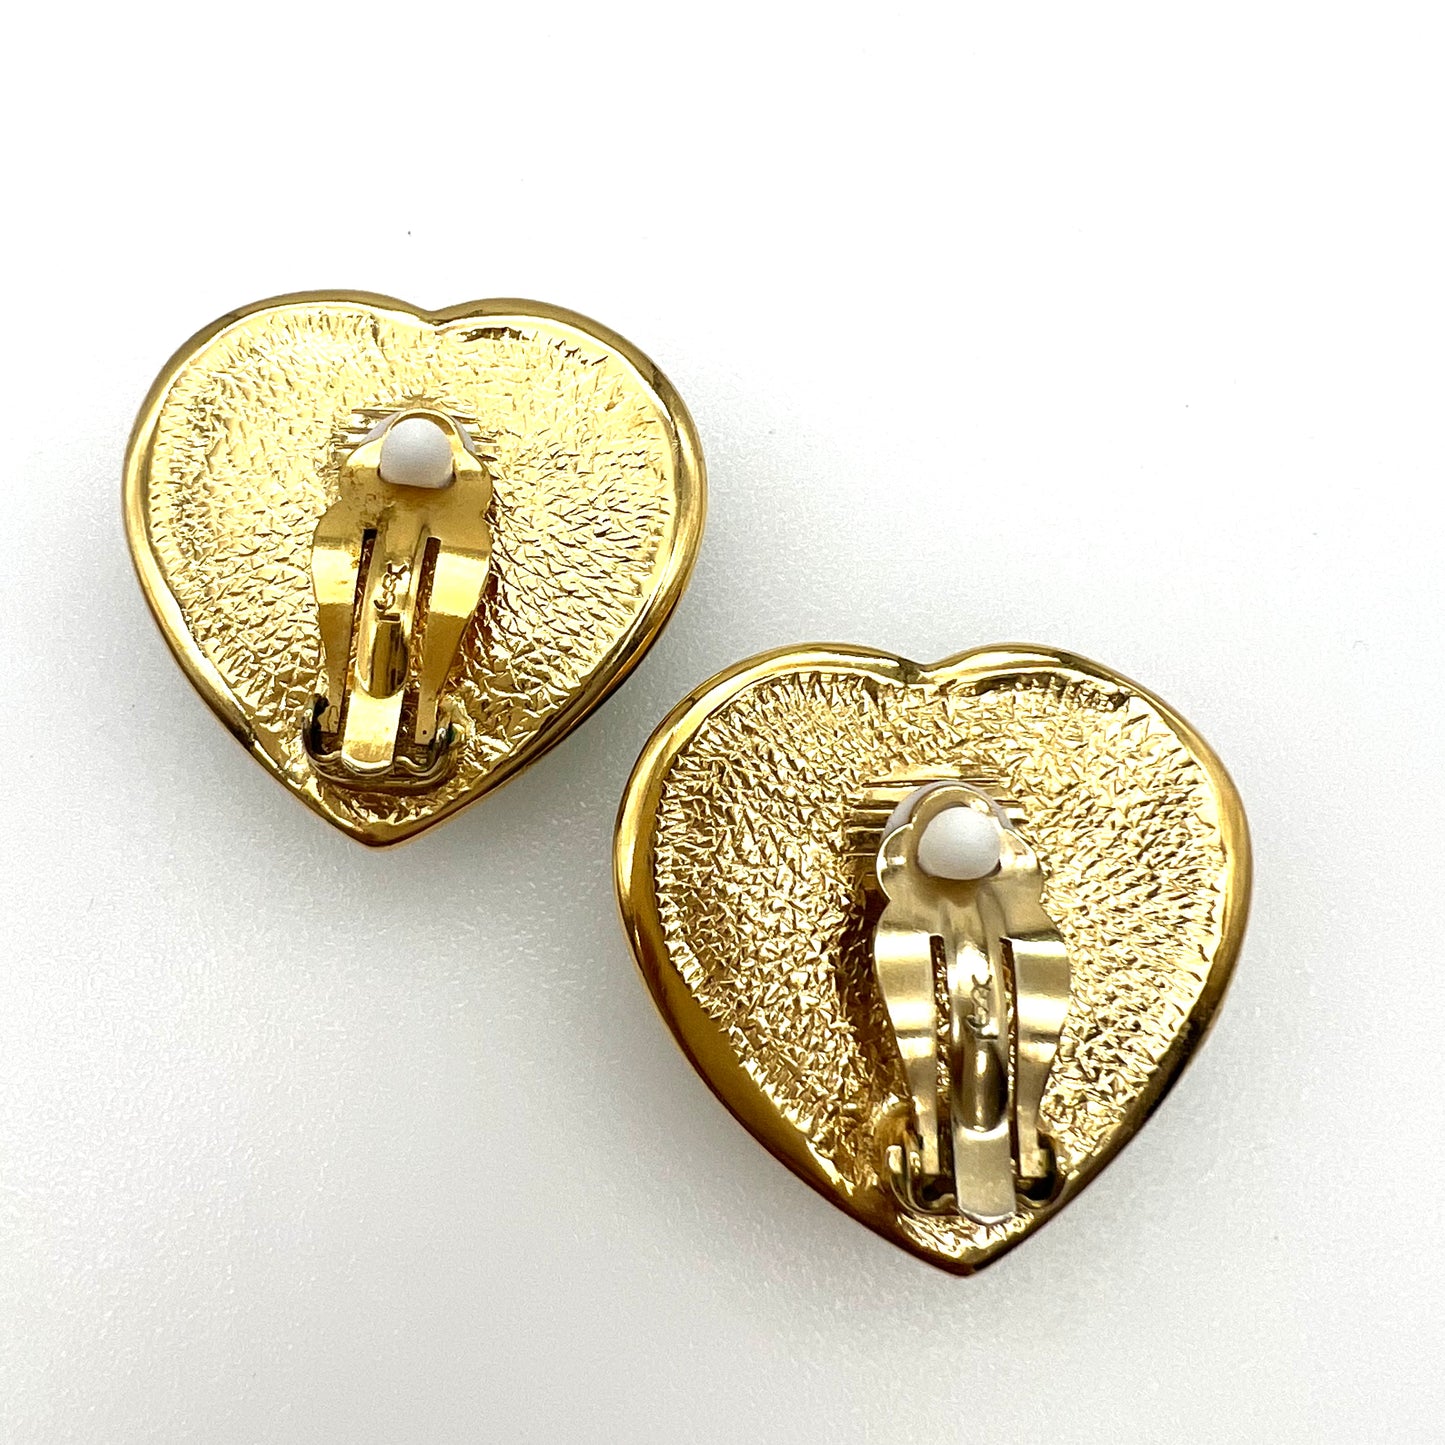 Yves Saint Laurent By Robert Goossens Large Heart-Shaped Chartreuse Faceted Resin Clip On Earrings In Original Box